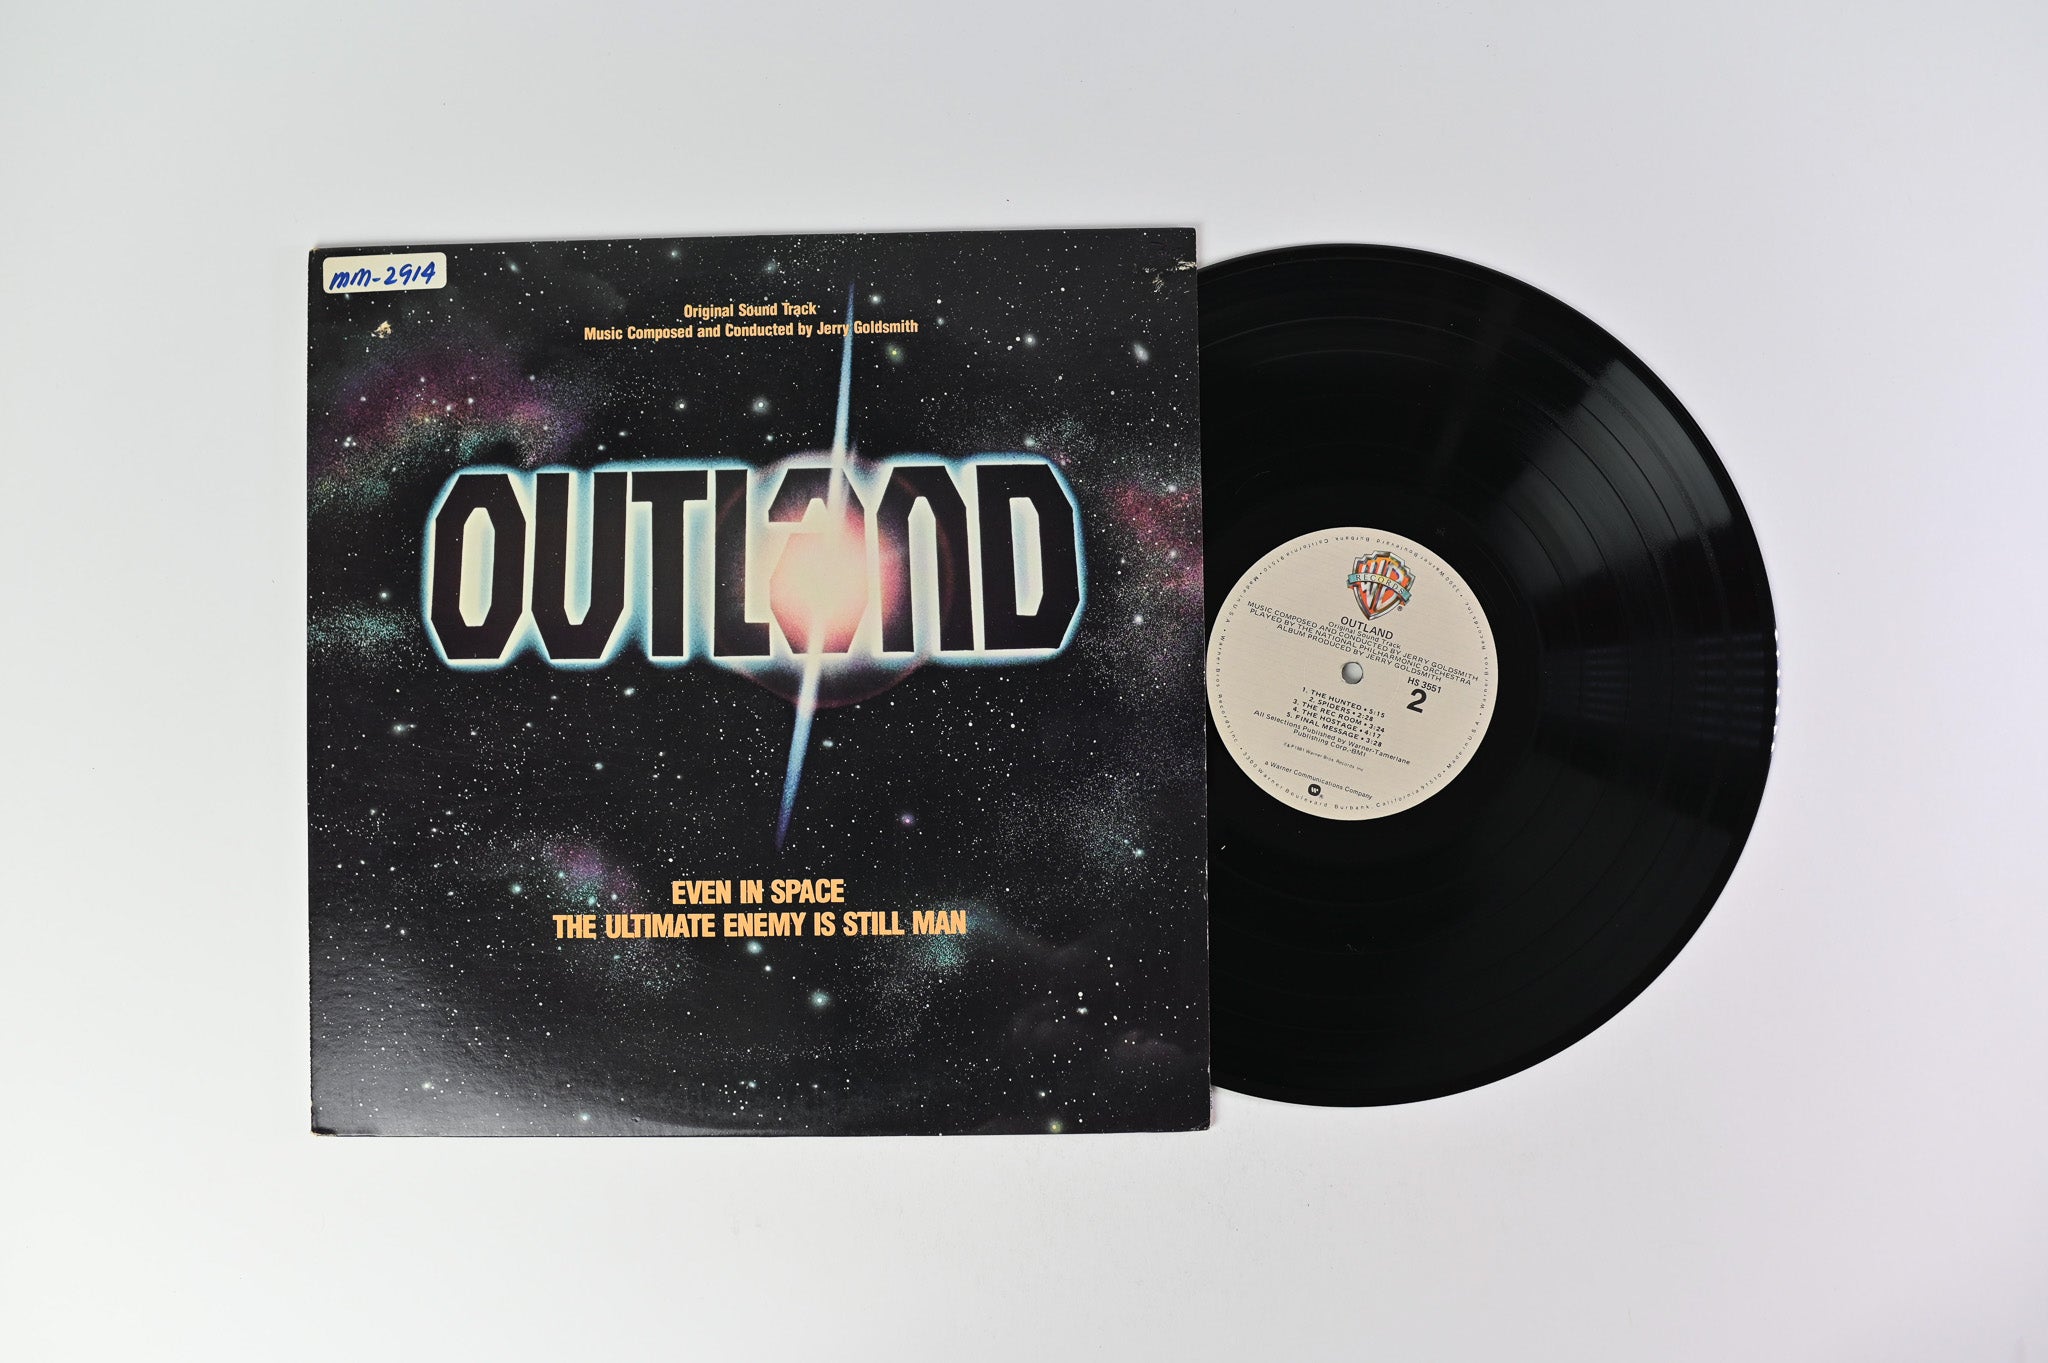 Jerry Goldsmith - Outland (Original Motion Picture Soundtrack) on Warner Bros. Records